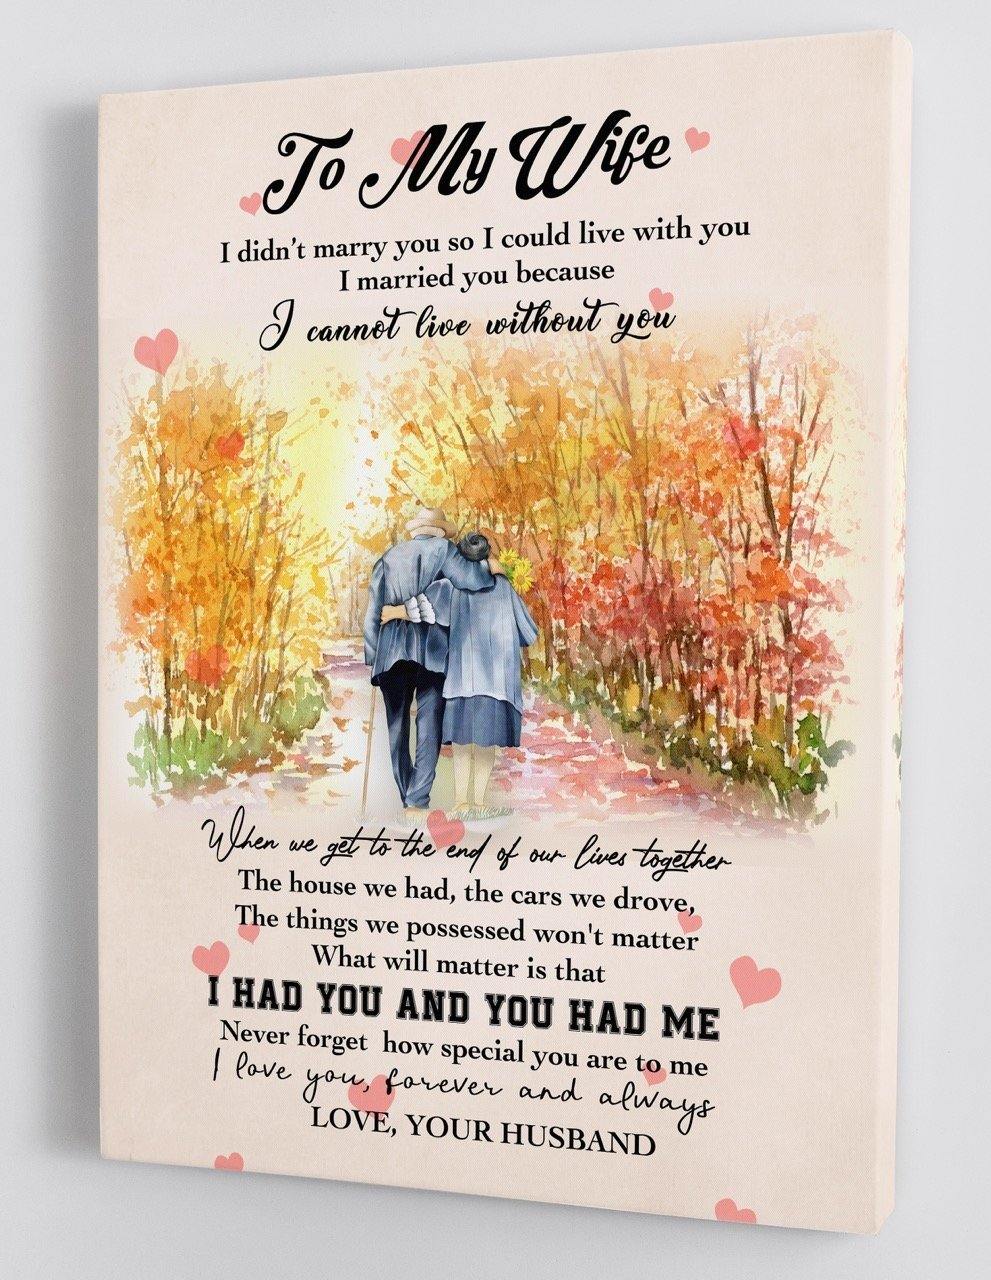 To My Wife - From Husband - Framed Canvas Gift HW003 - DivesArt LLC